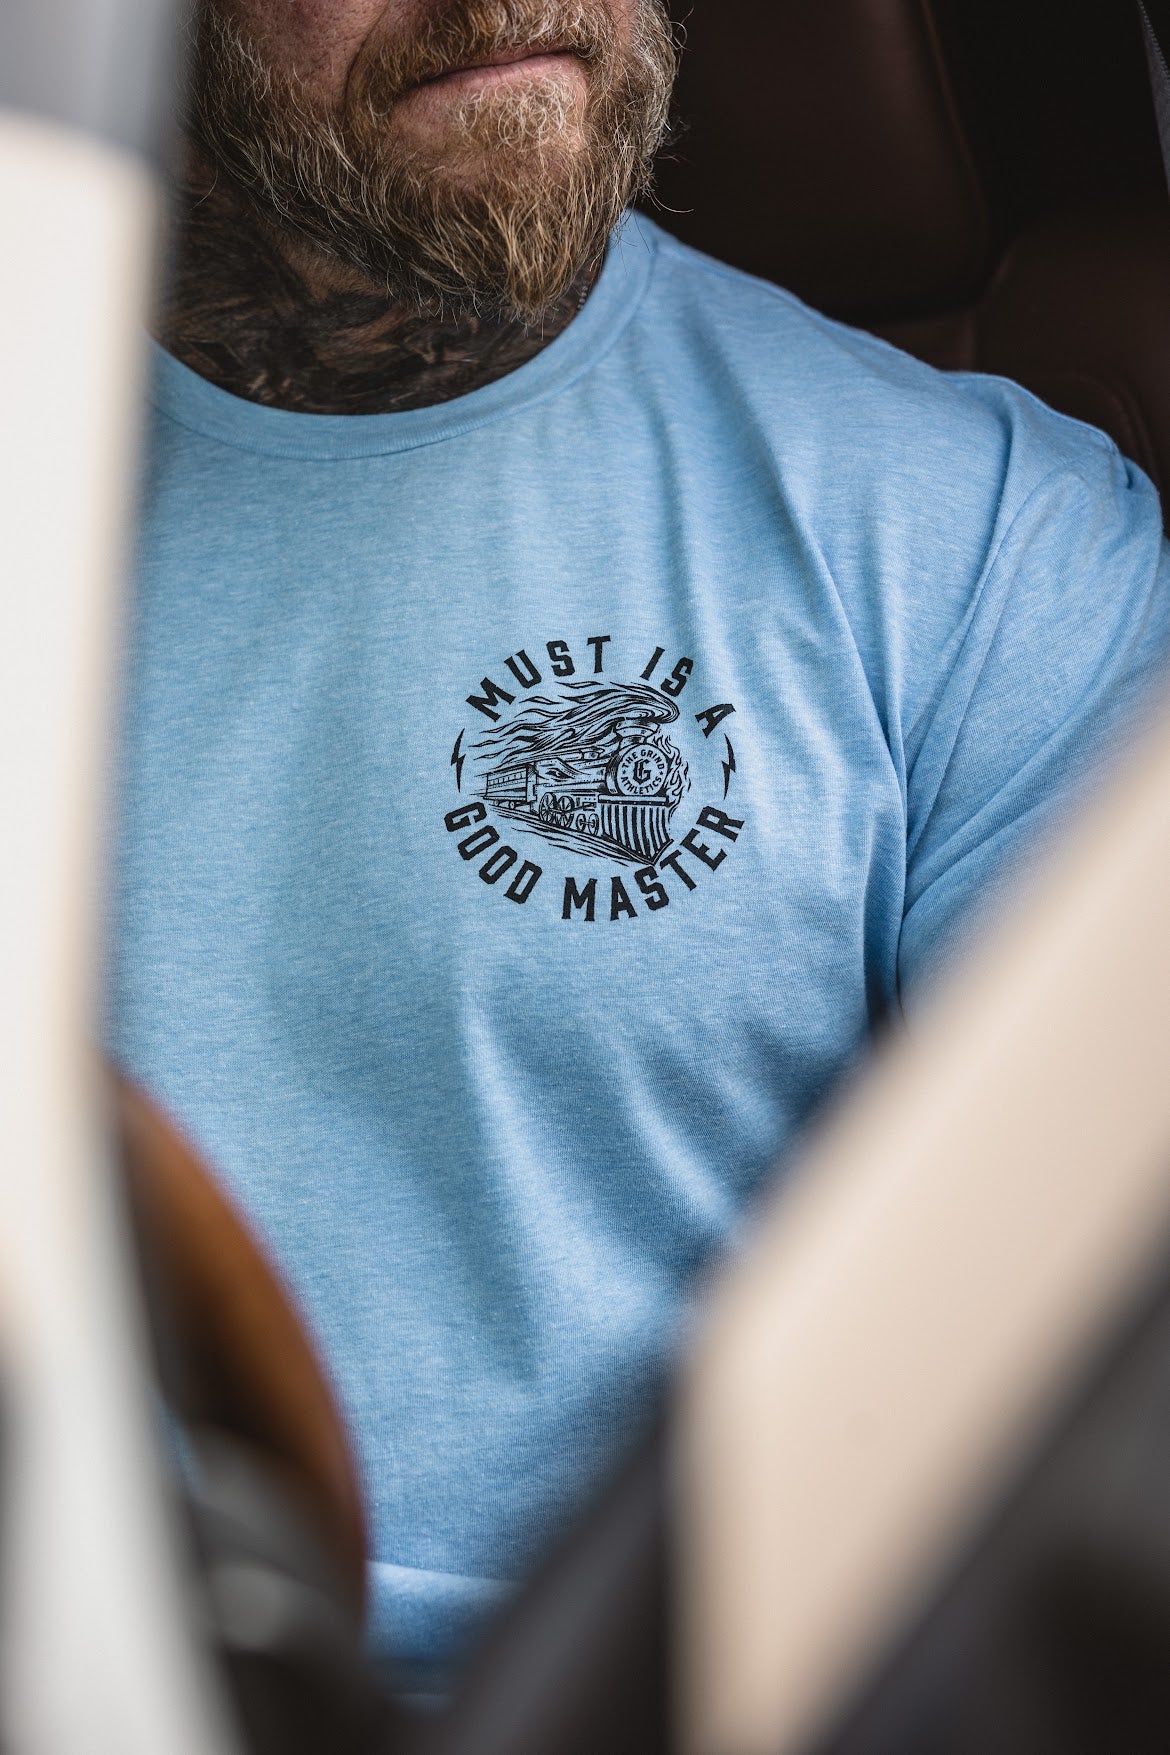 The Grind Athletics Must is a Good Master - Long Sleeve T